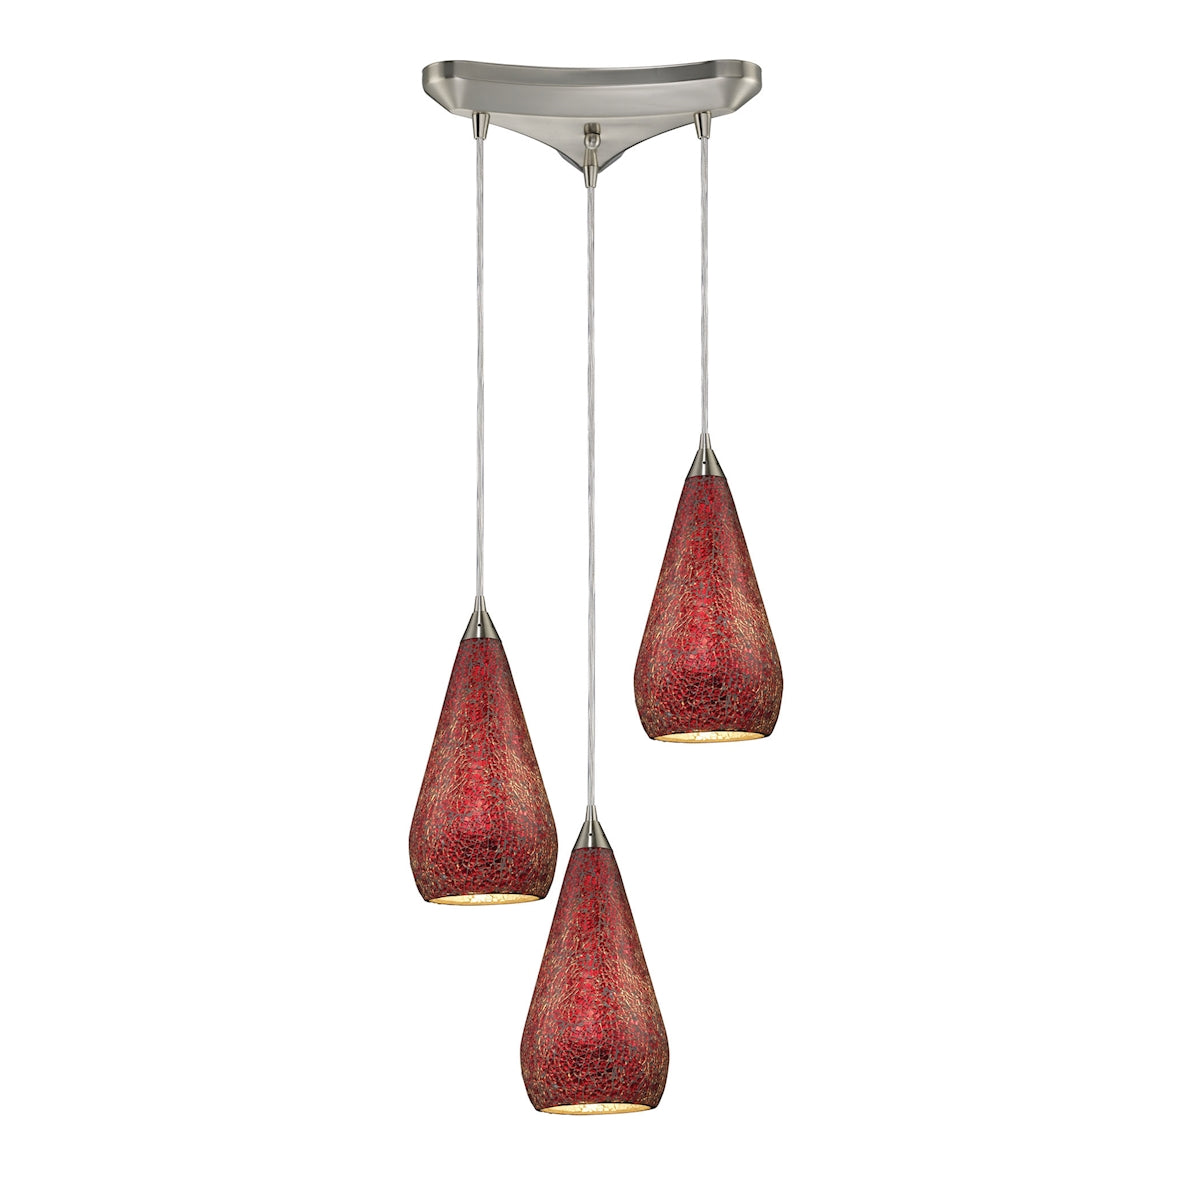 ELK Lighting 546-3RBY-CRC Curvalo 3-Light Triangular Pendant Fixture in Satin Nickel with Ruby Crackle Glass